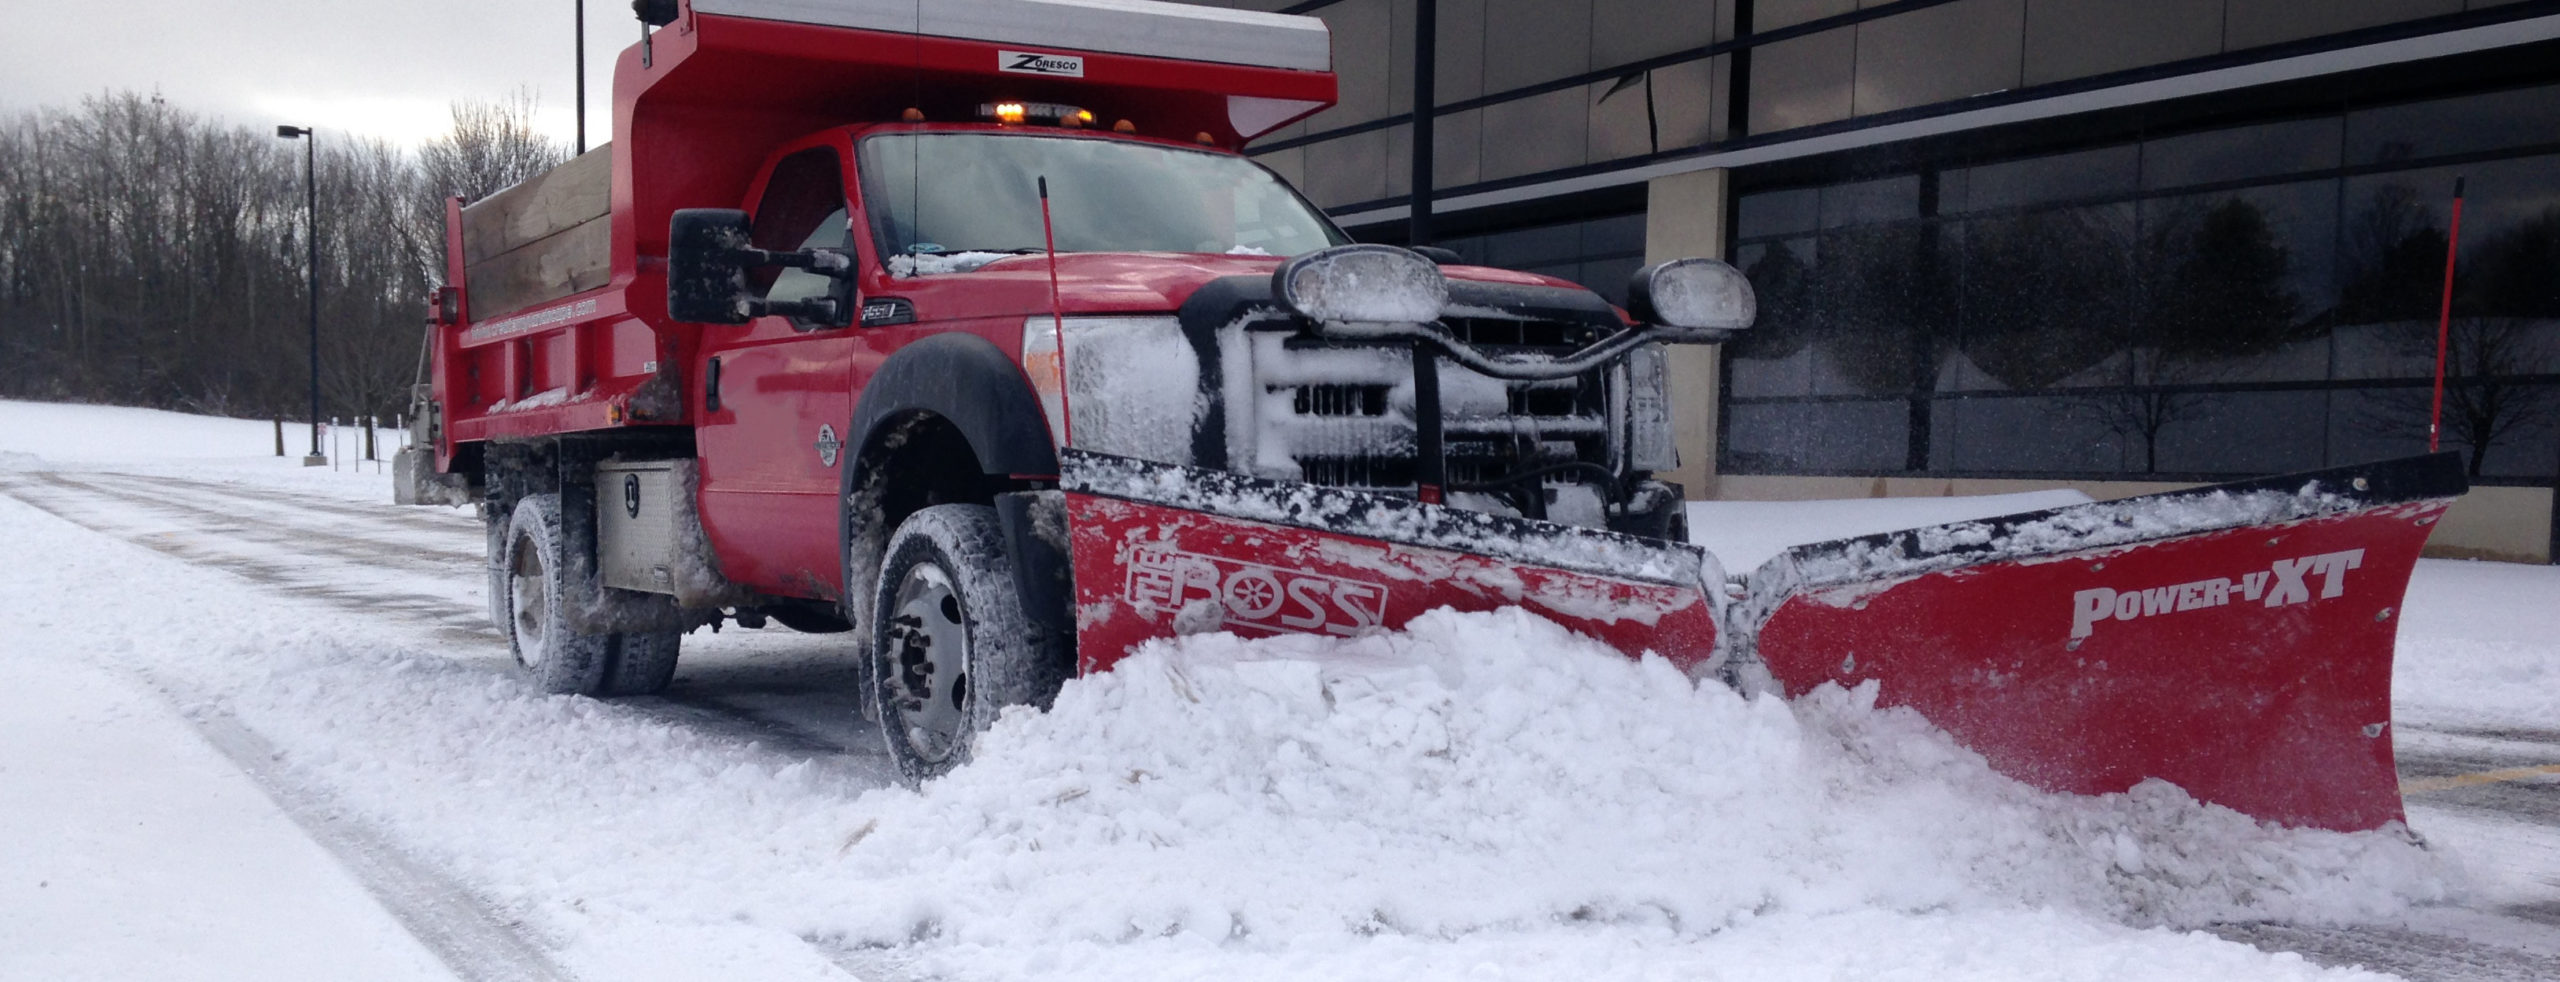 Four Reasons Why You Need To Hire A Commercial Snow Removal Service Right Now